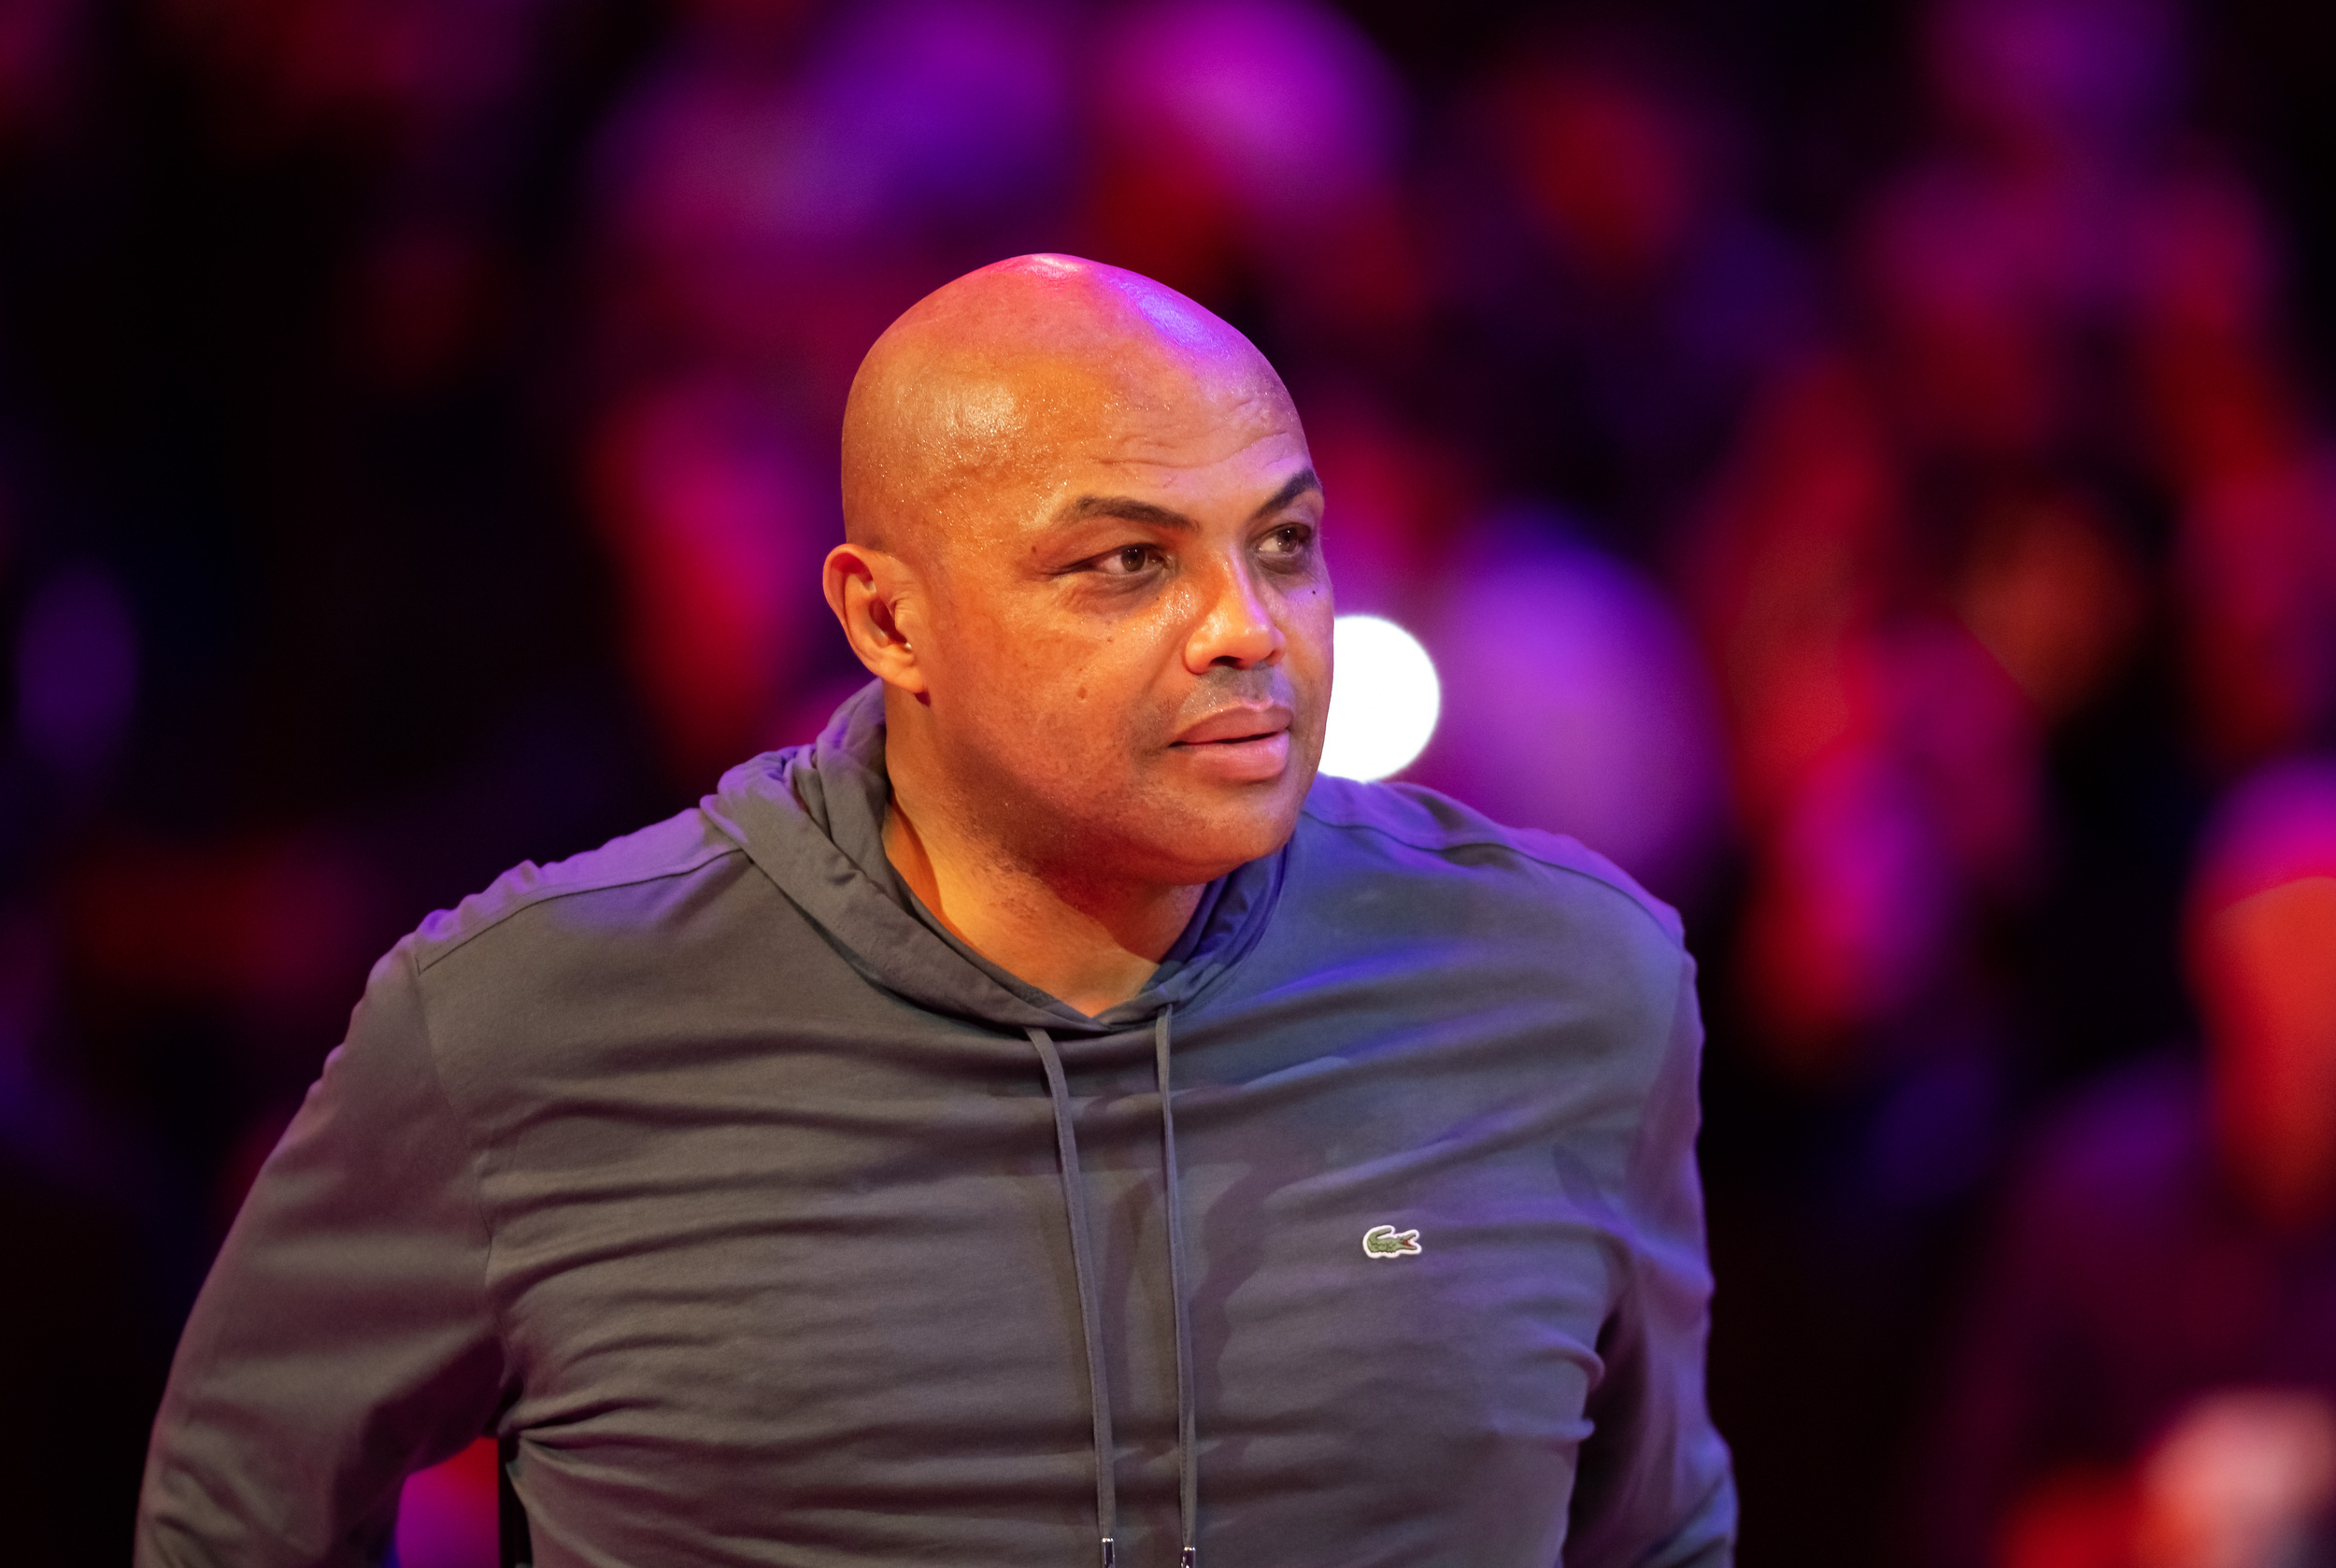 amazon, charles barkley speaks on his next move if tnt loses nba media rights